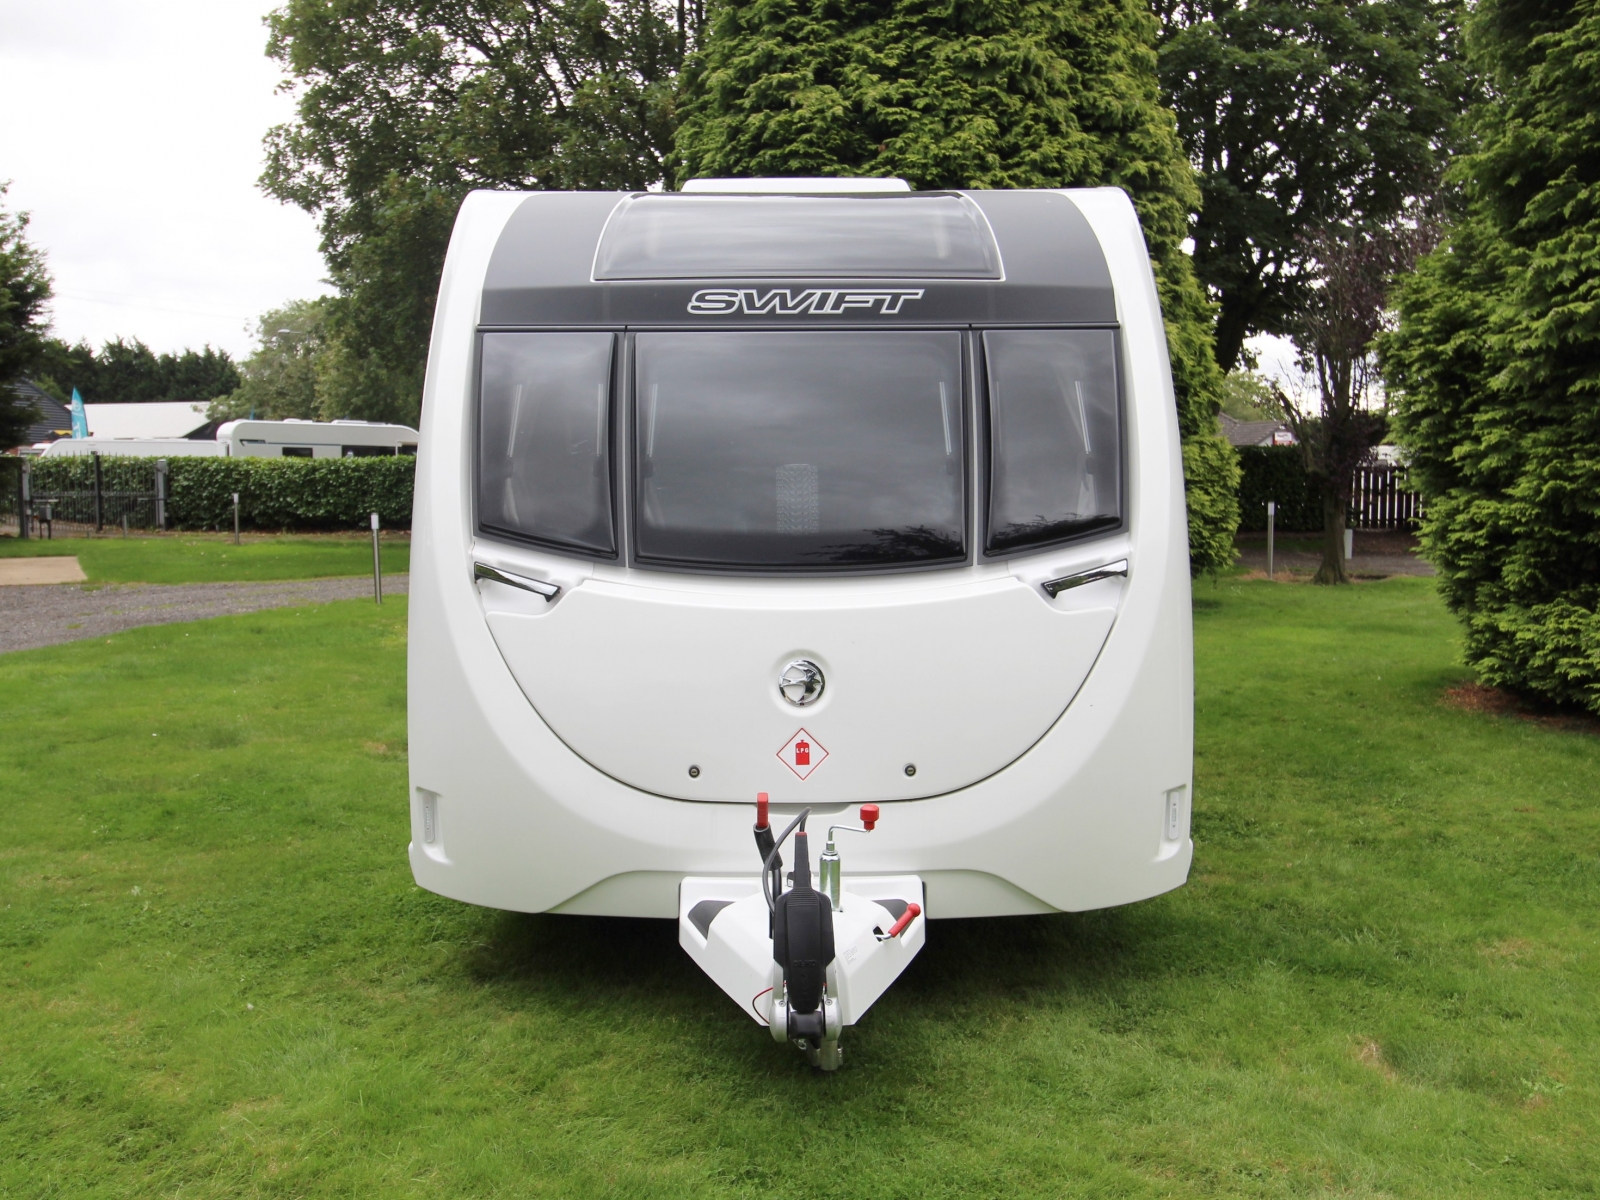 Swift Ace Globetrotter 2020 - Wandahome Special Edition image